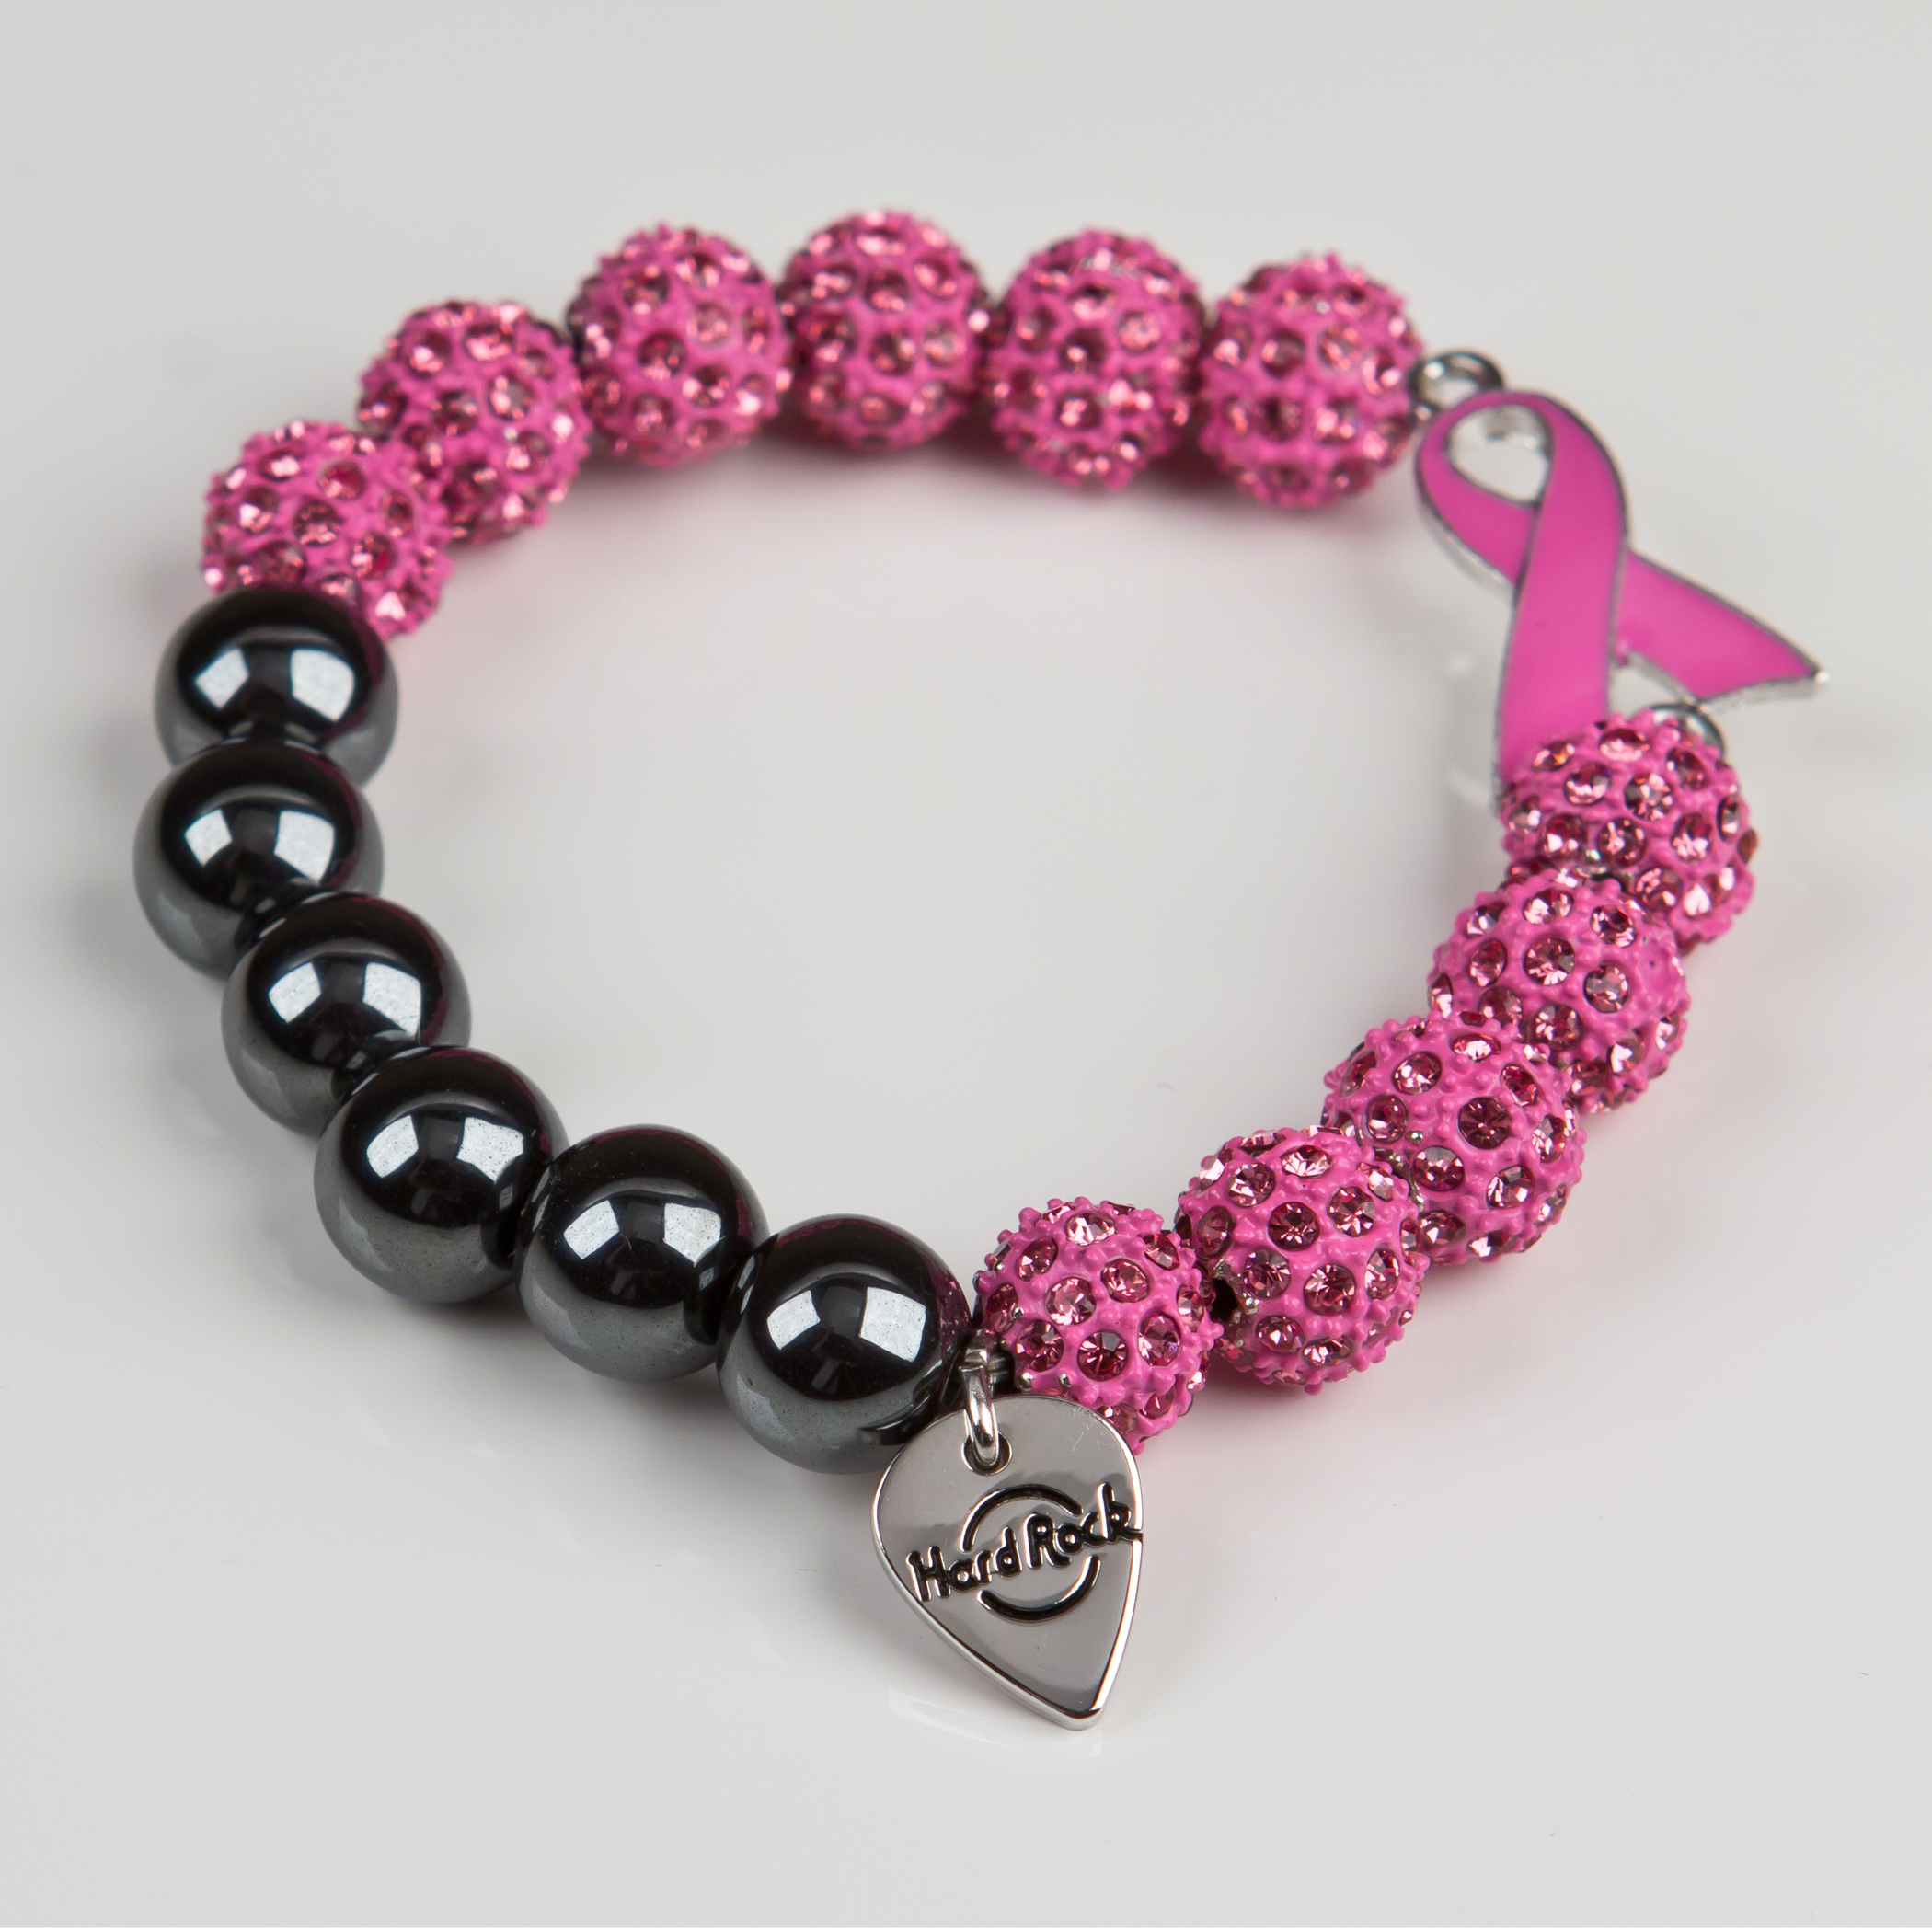 Shop for the Cause 2012: Breast Cancer Awareness Style with Substance